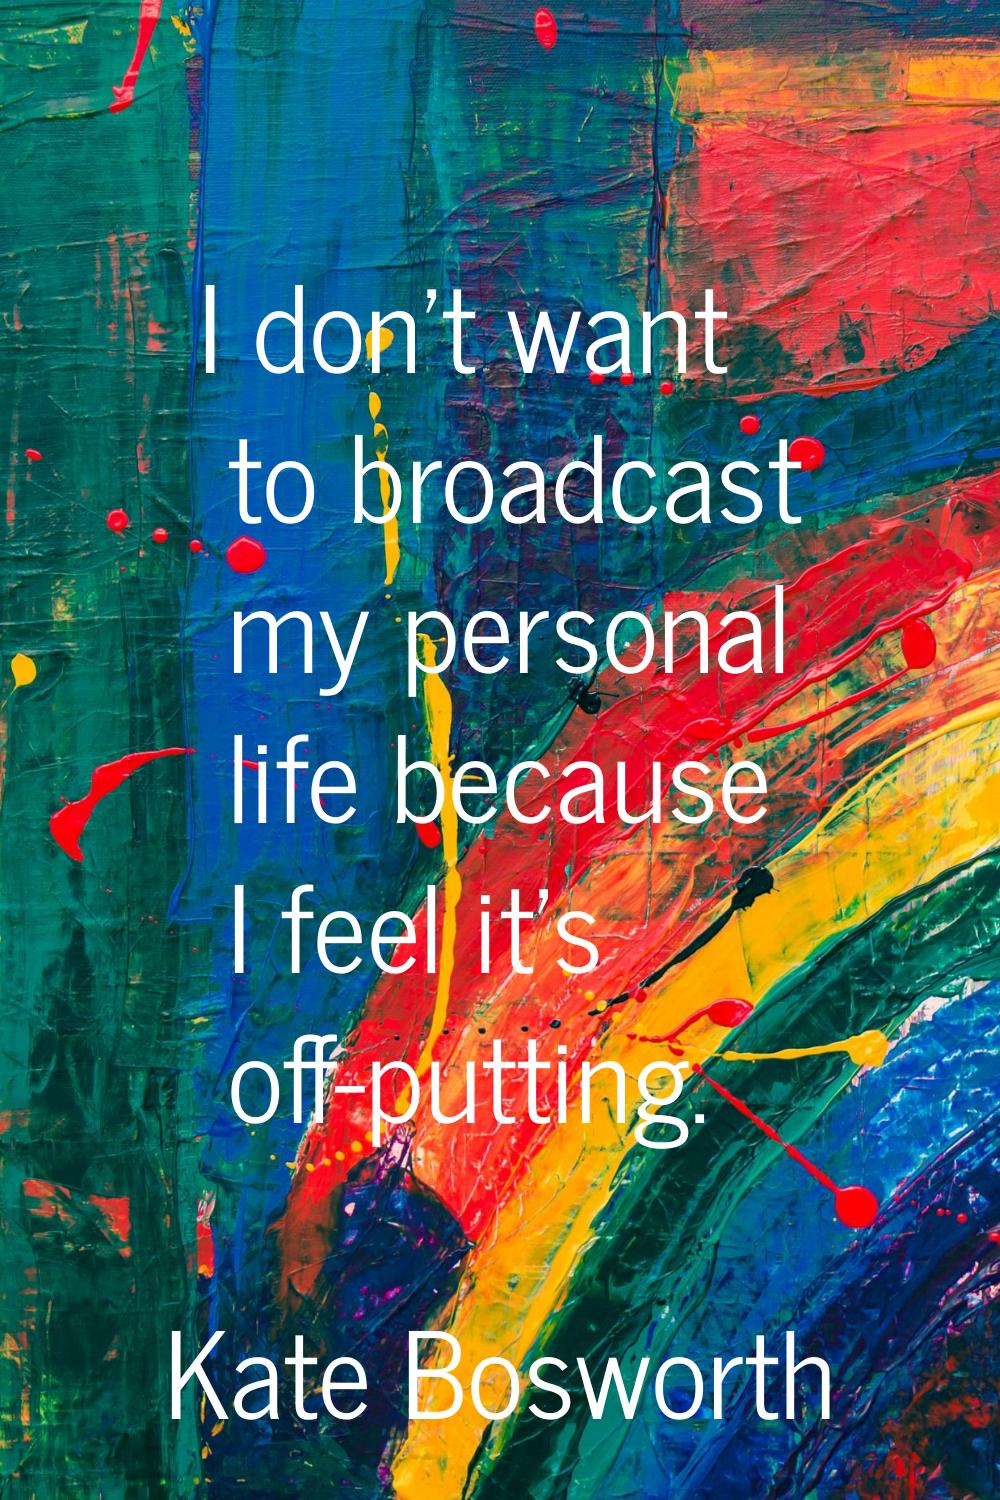 I don't want to broadcast my personal life because I feel it's off-putting.